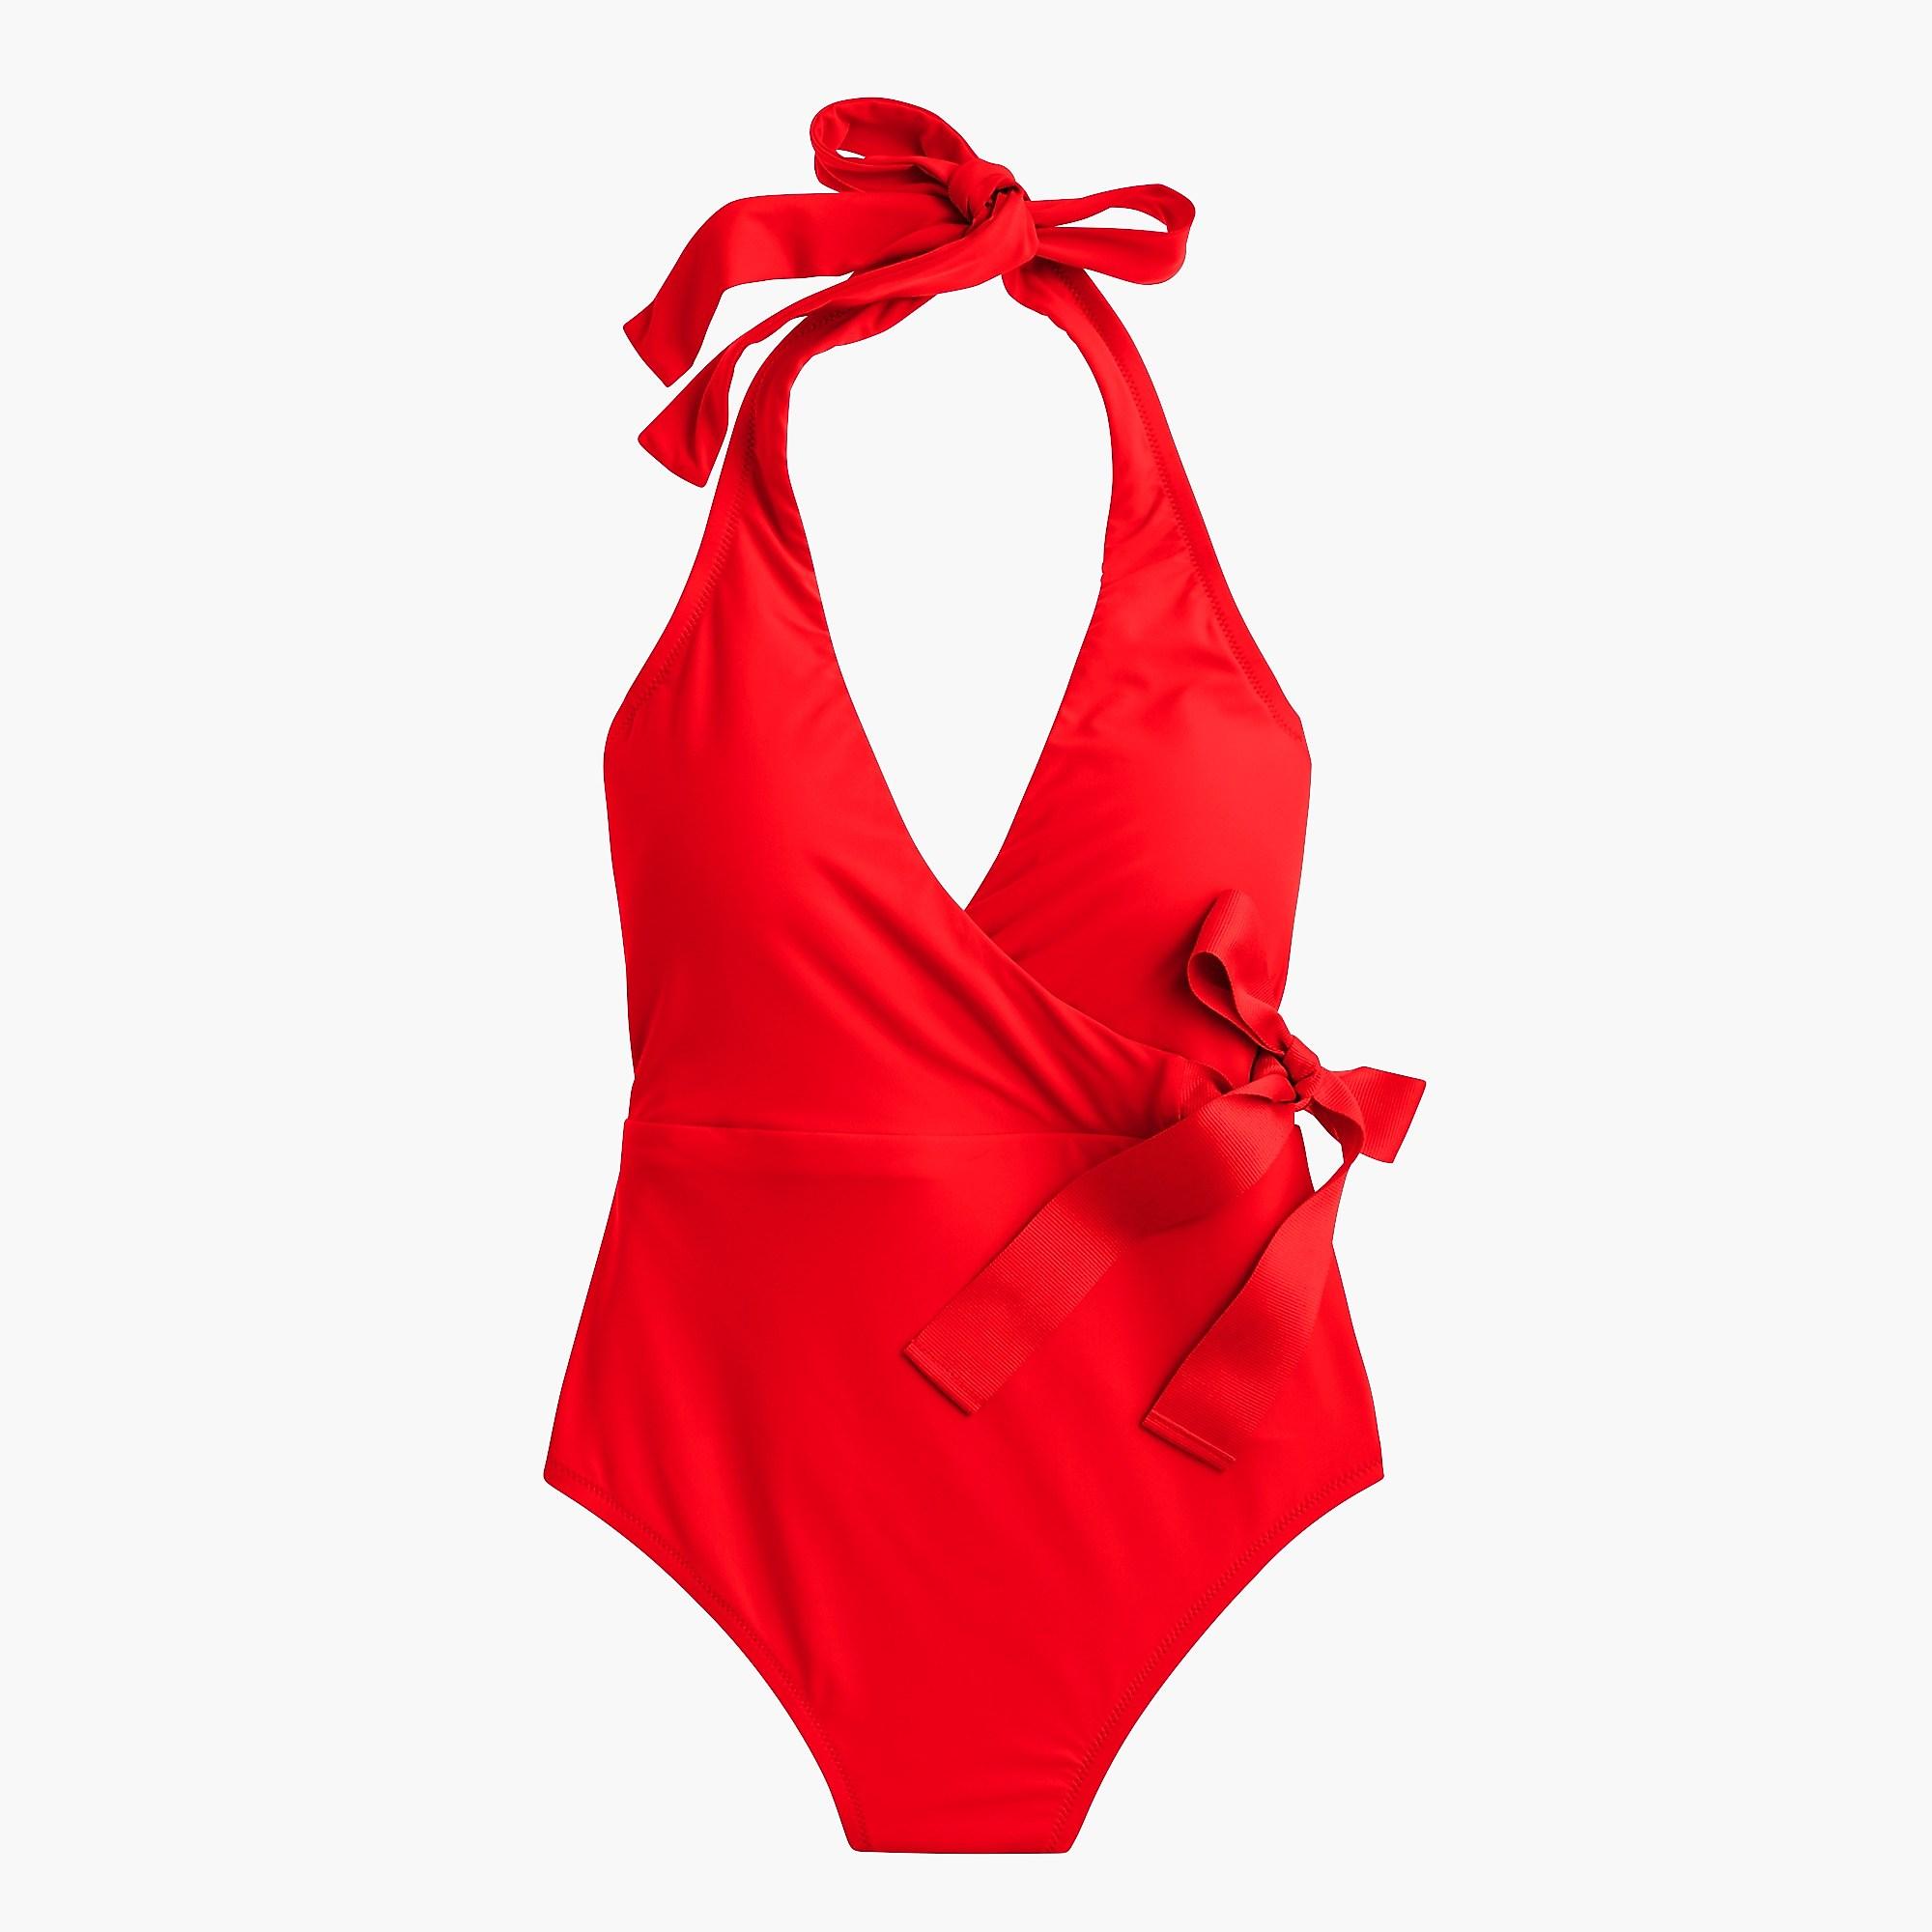 Lyst - J.Crew Halter Wrap One-piece Swimsuit in Red